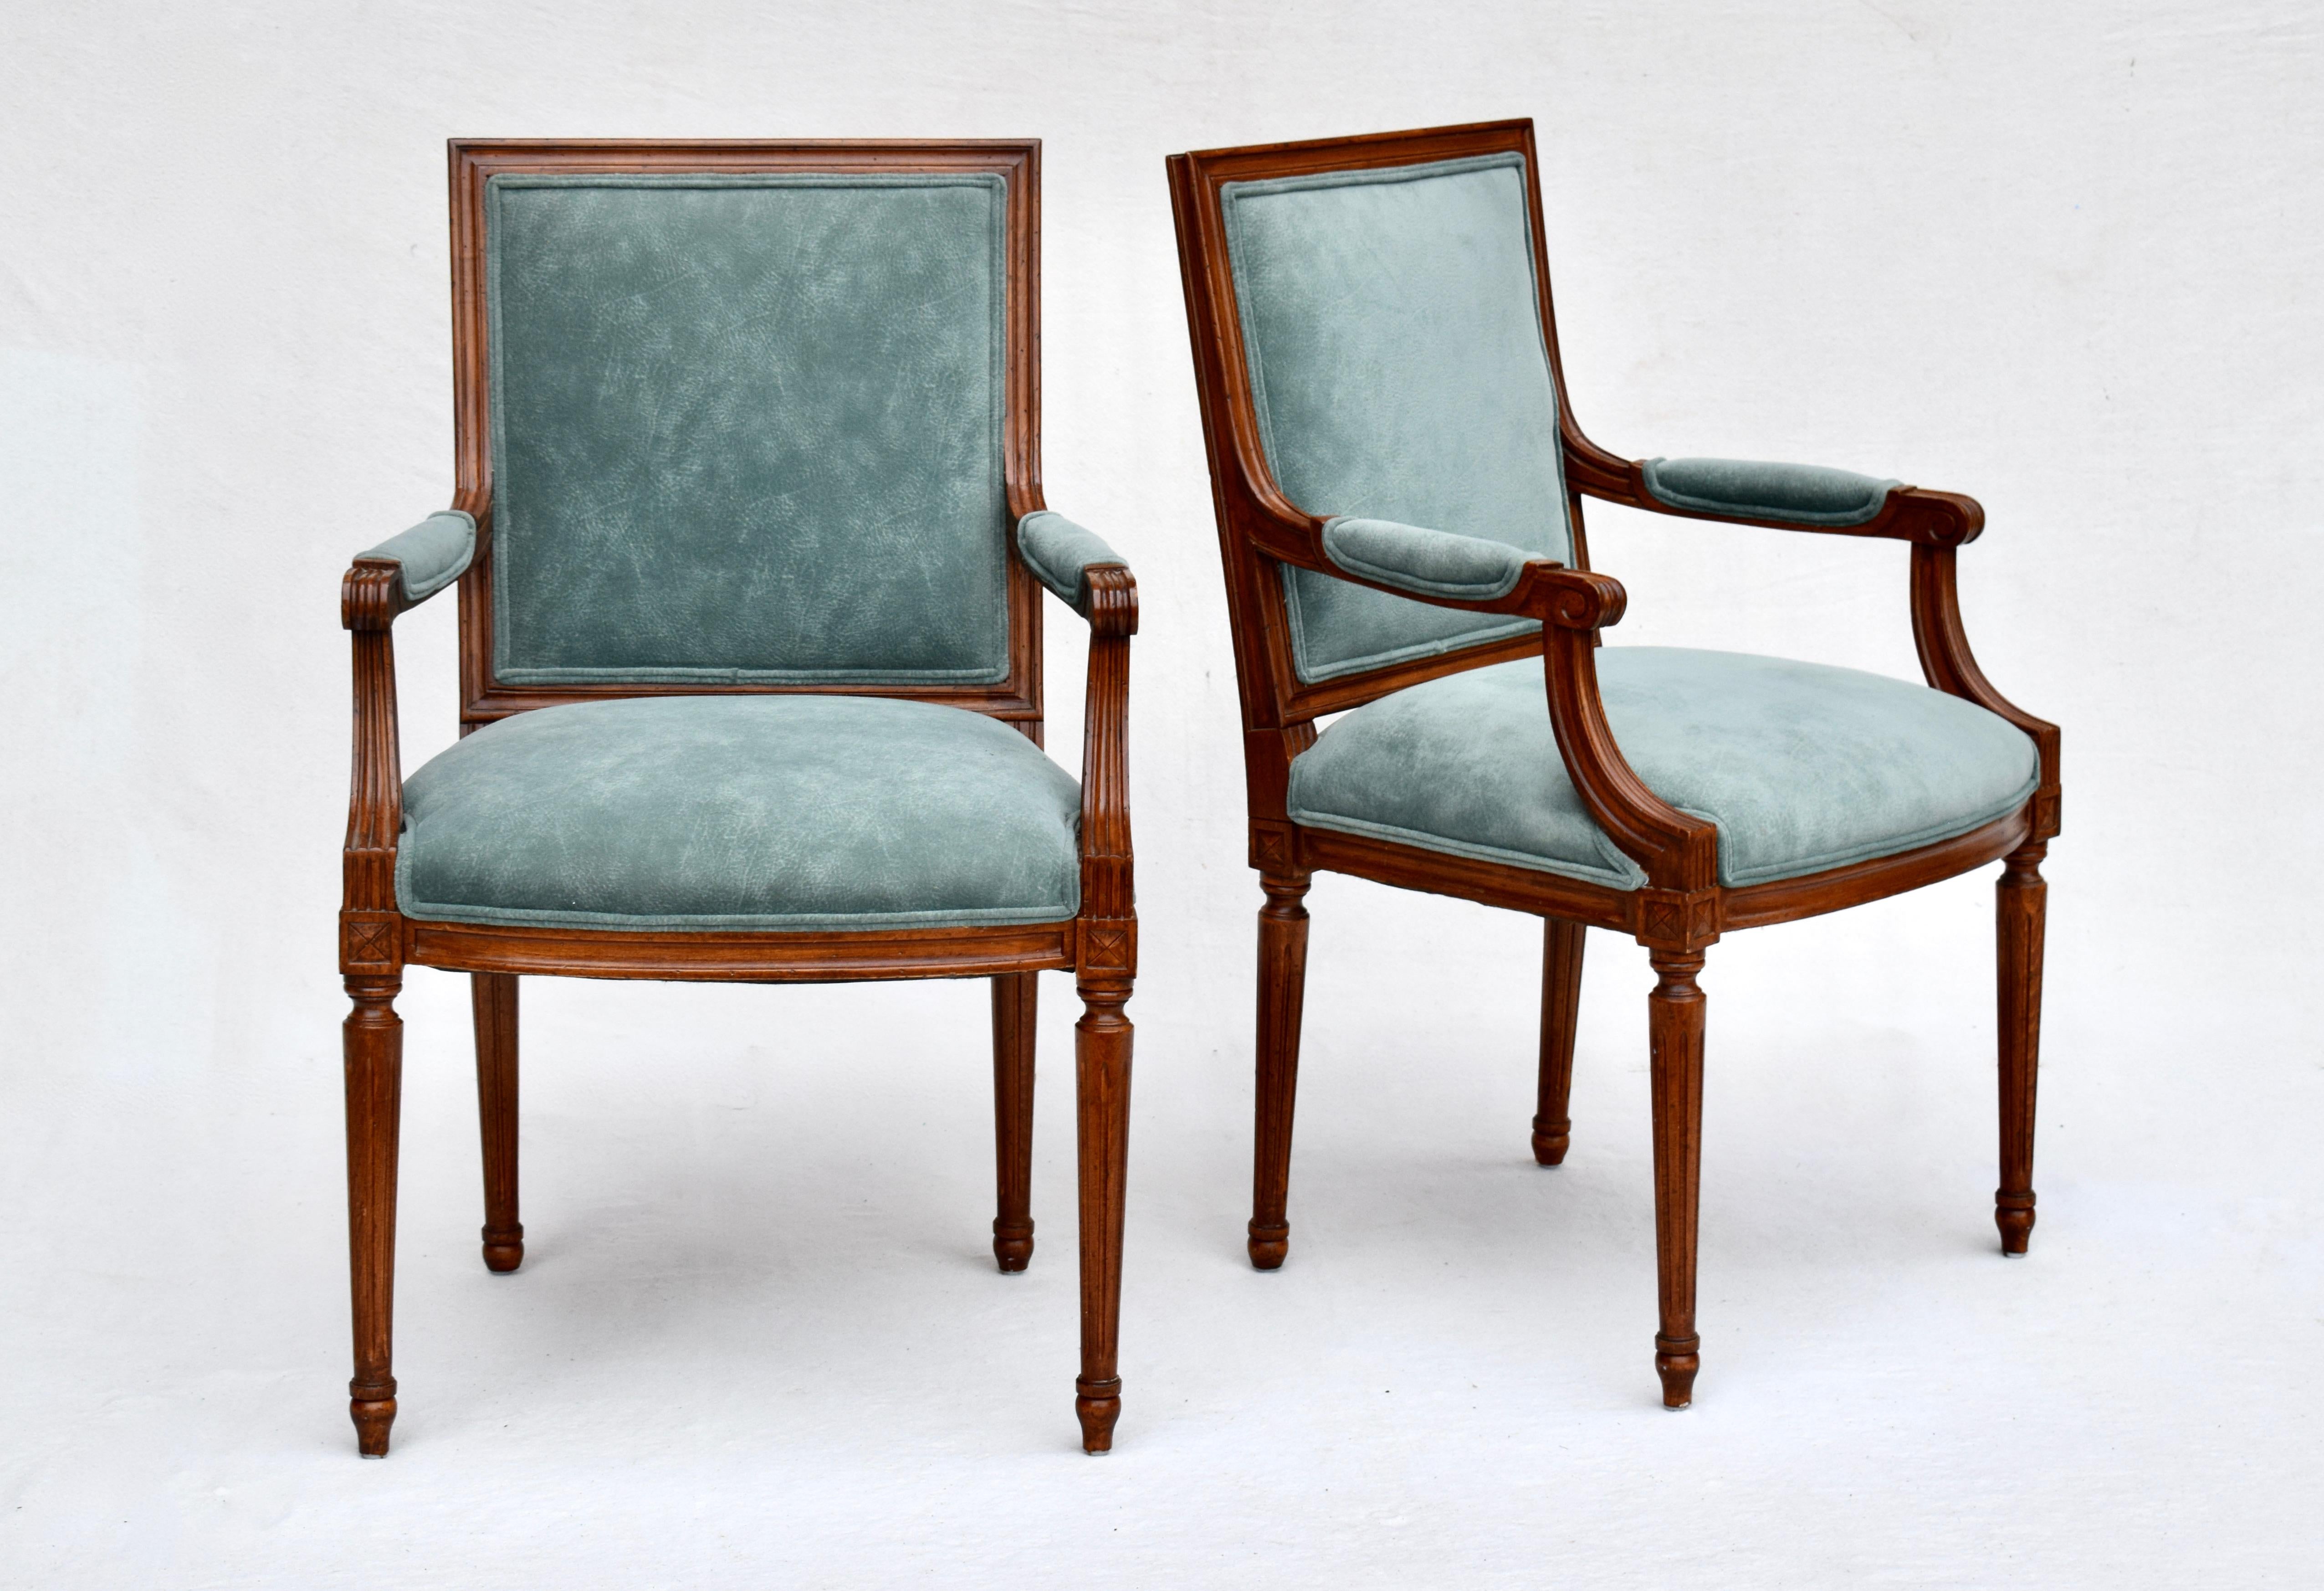 Exquisite set of eight mid 20th c. French Louis XVI solid walnut dining chairs. Two arm chairs & six side chairs are upholstered in a very convincing teal suede like faux leather; easy to clean & ready for use. The backs of the chairs feature woven